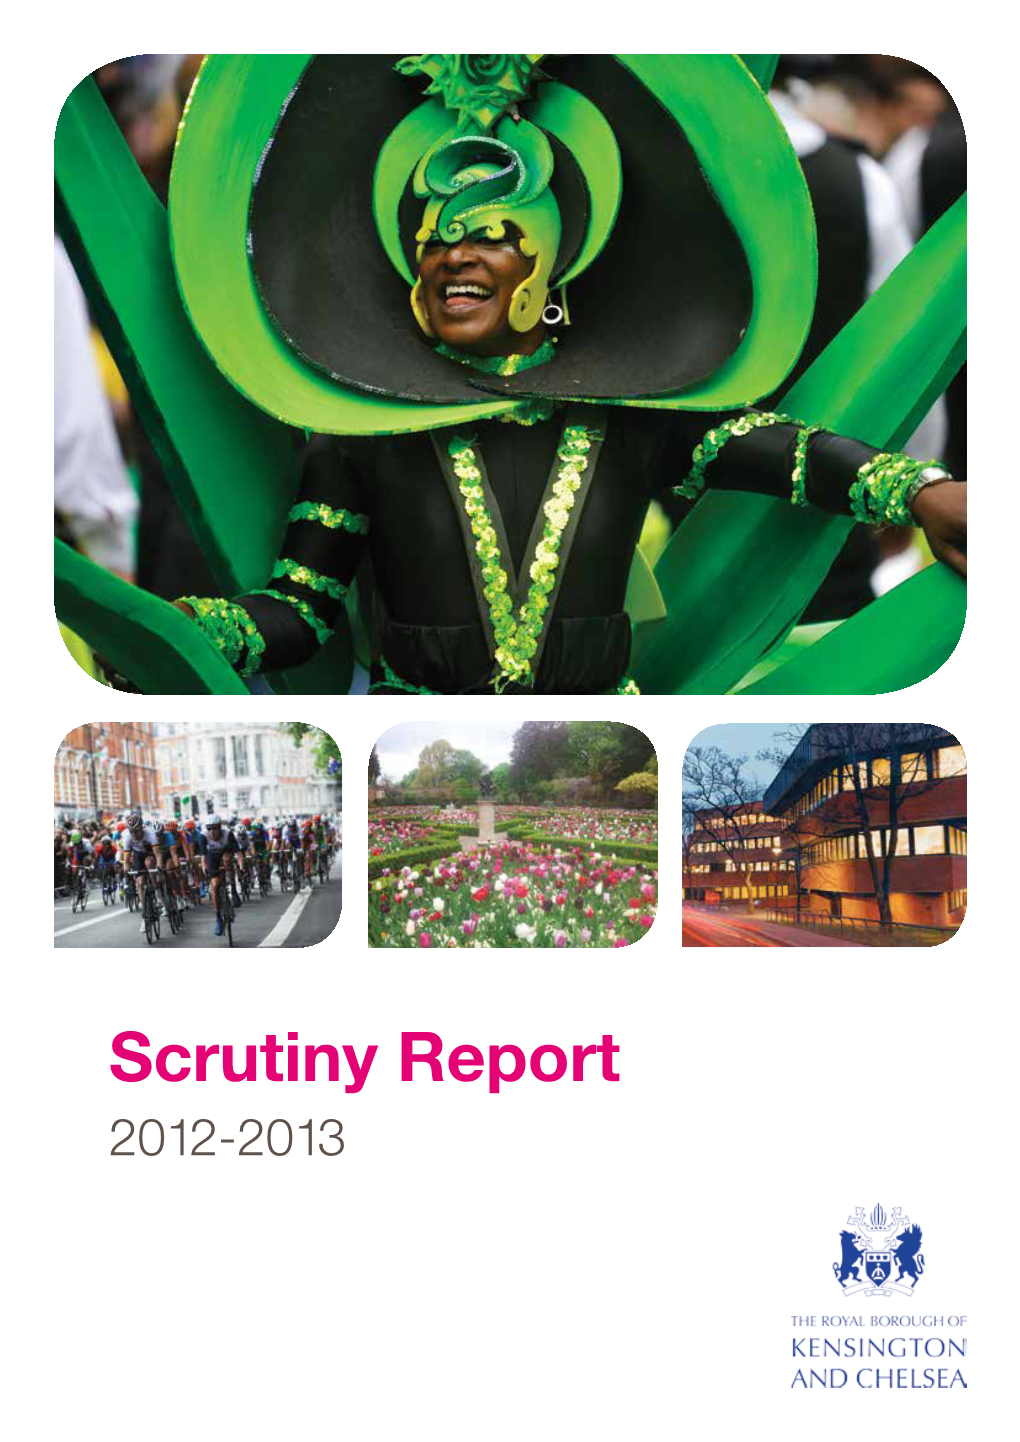 Scrutiny Report 2012-2013 List of Scrutiny Reviews and Mini-Groups Reporting in 2012-13